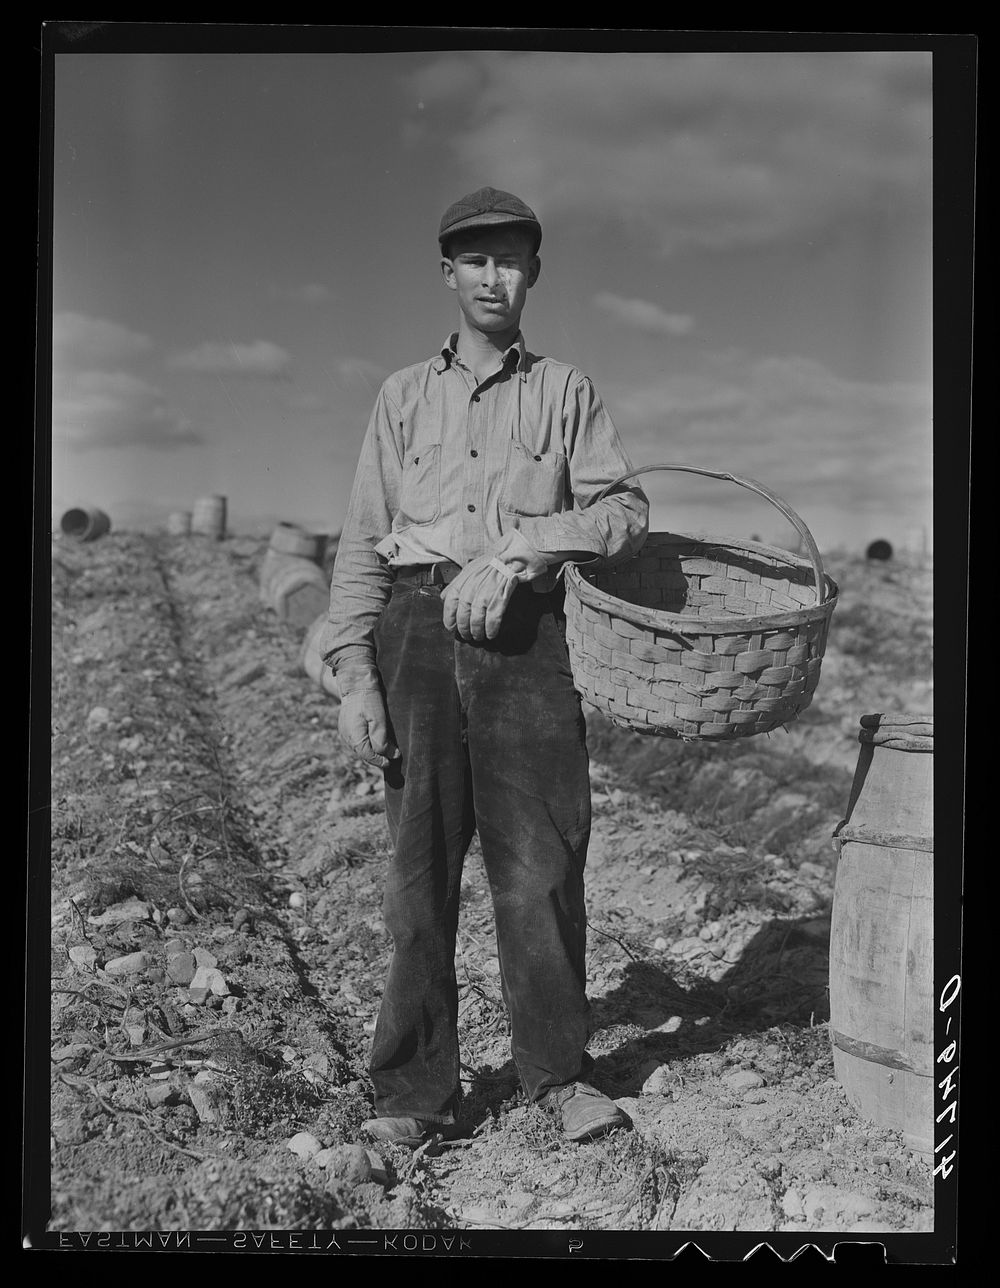 French-Canadian potato picker on a farm near Caribou, Maine. Sourced from the Library of Congress.